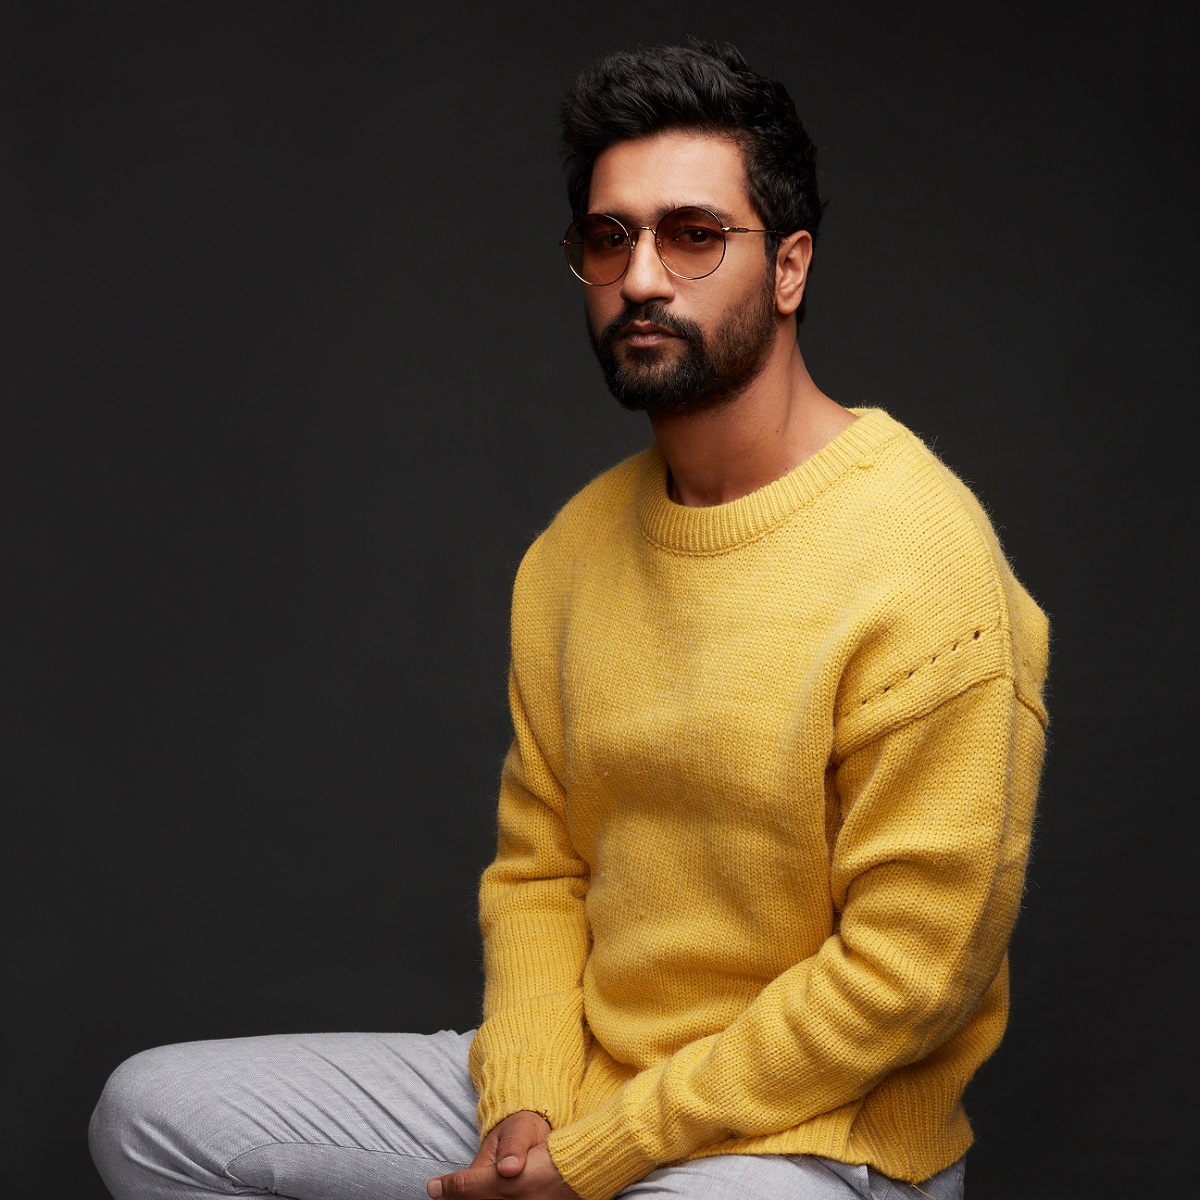 EXCLUSIVE: Vicky Kaushal on Ashwatthama being put on hold: ‘Logistically it's not the correct time to make it'